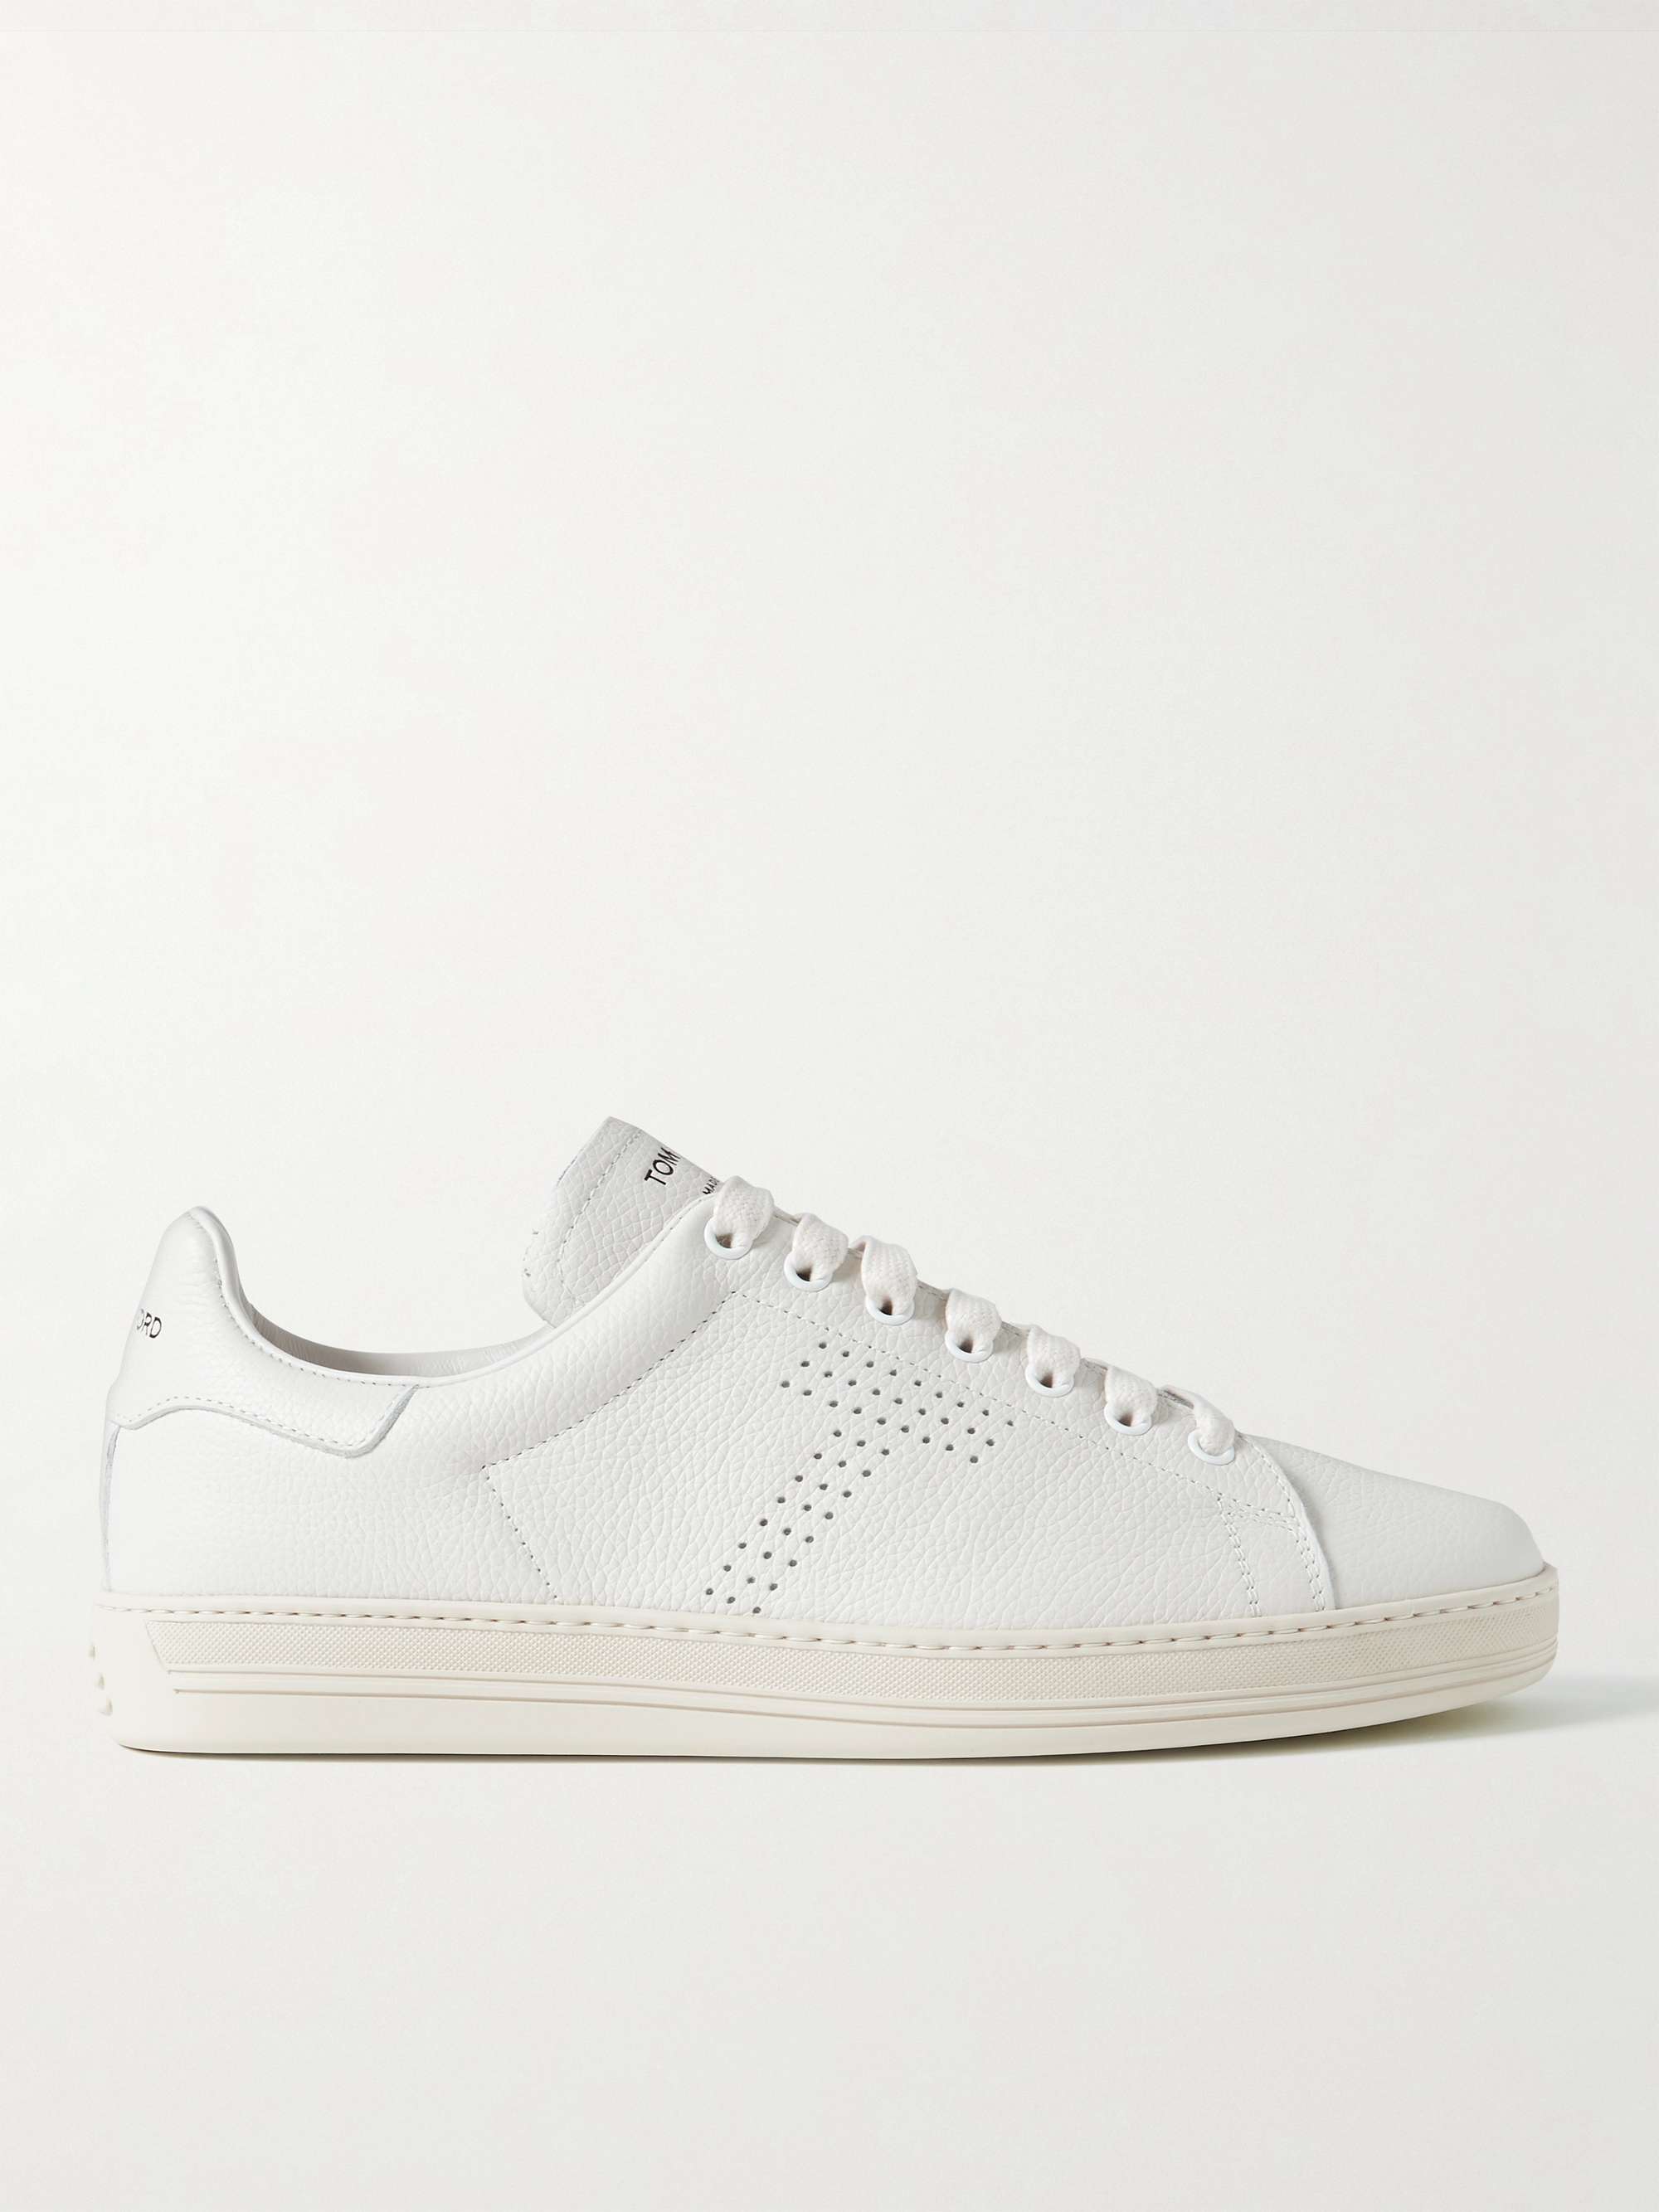 TOM FORD Warwick Perforated Full-Grain Leather Sneakers